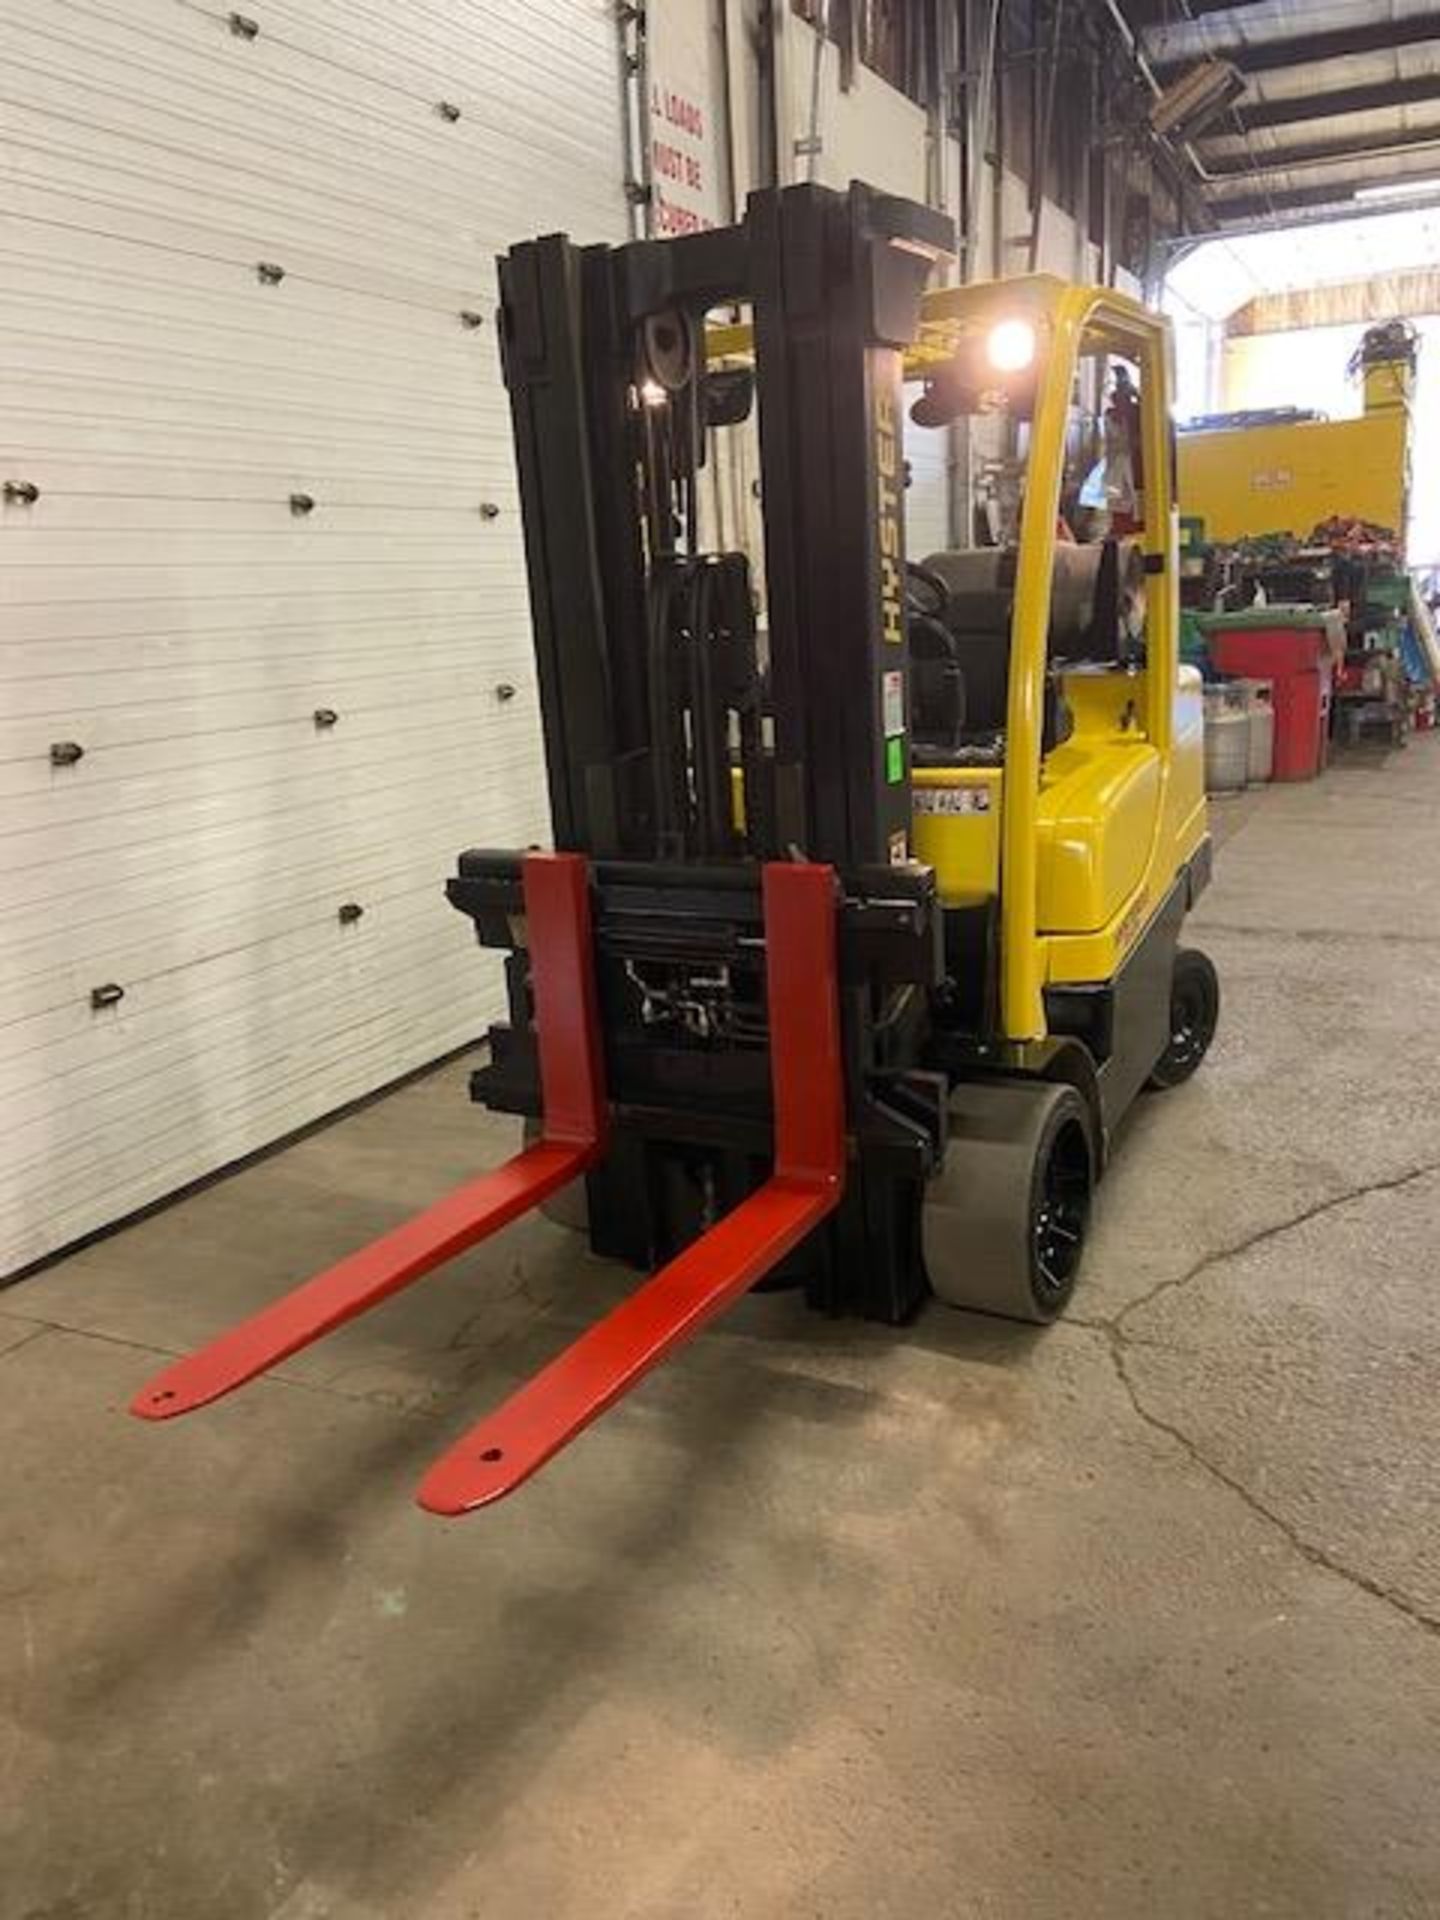 FREE CUSTOMS - 2014 Hyster 8000lbs Capacity Forklift LPG (Propane) with sideshift and 3 stage mast - Image 2 of 3